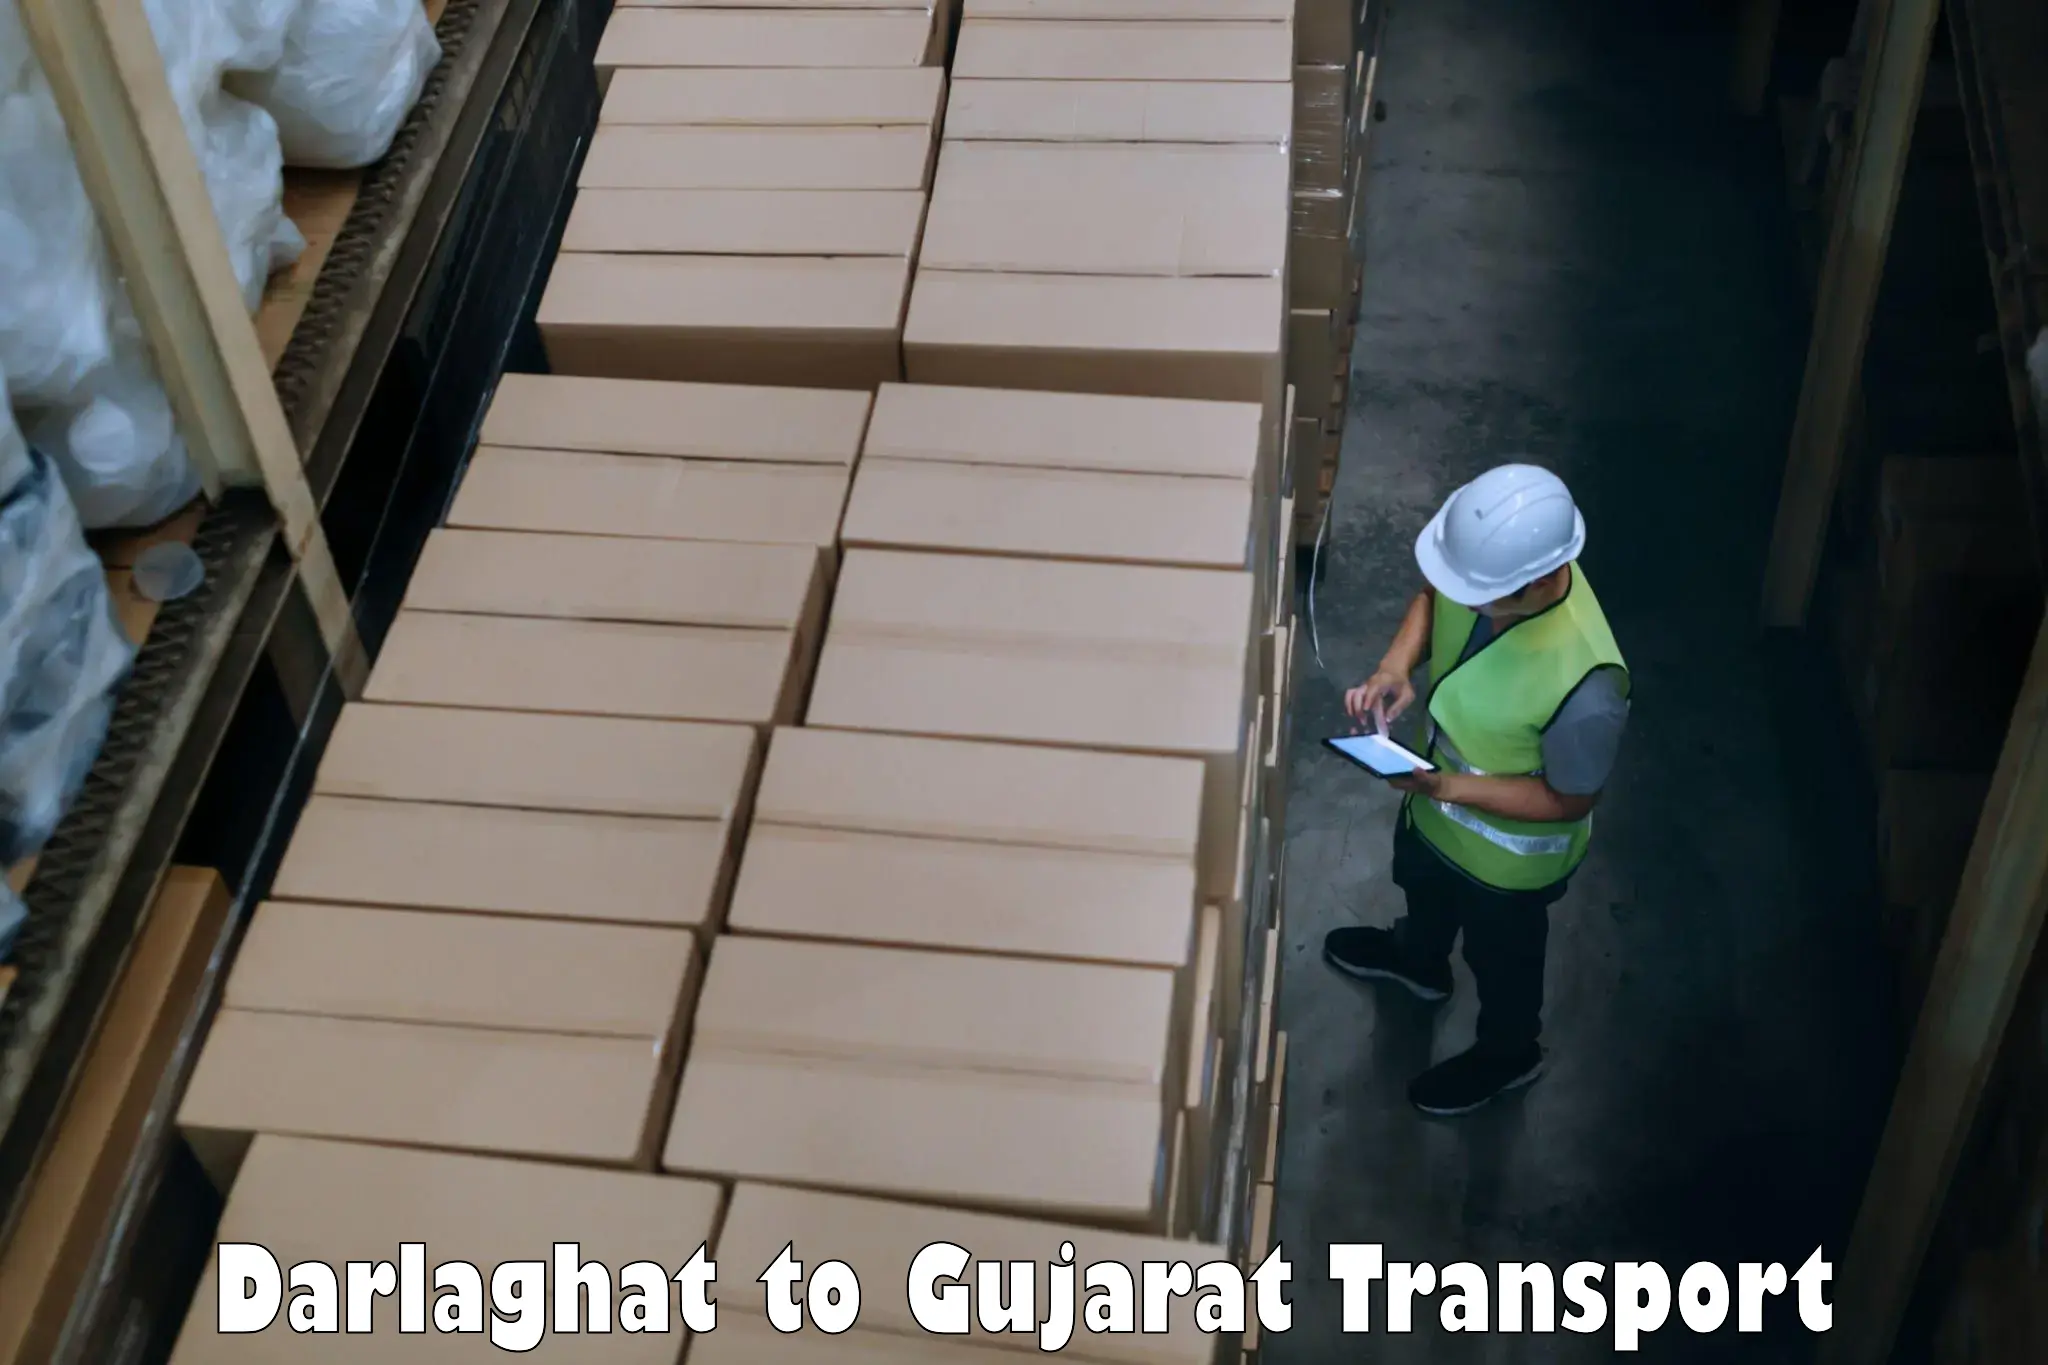 Delivery service Darlaghat to Patan Gujarat